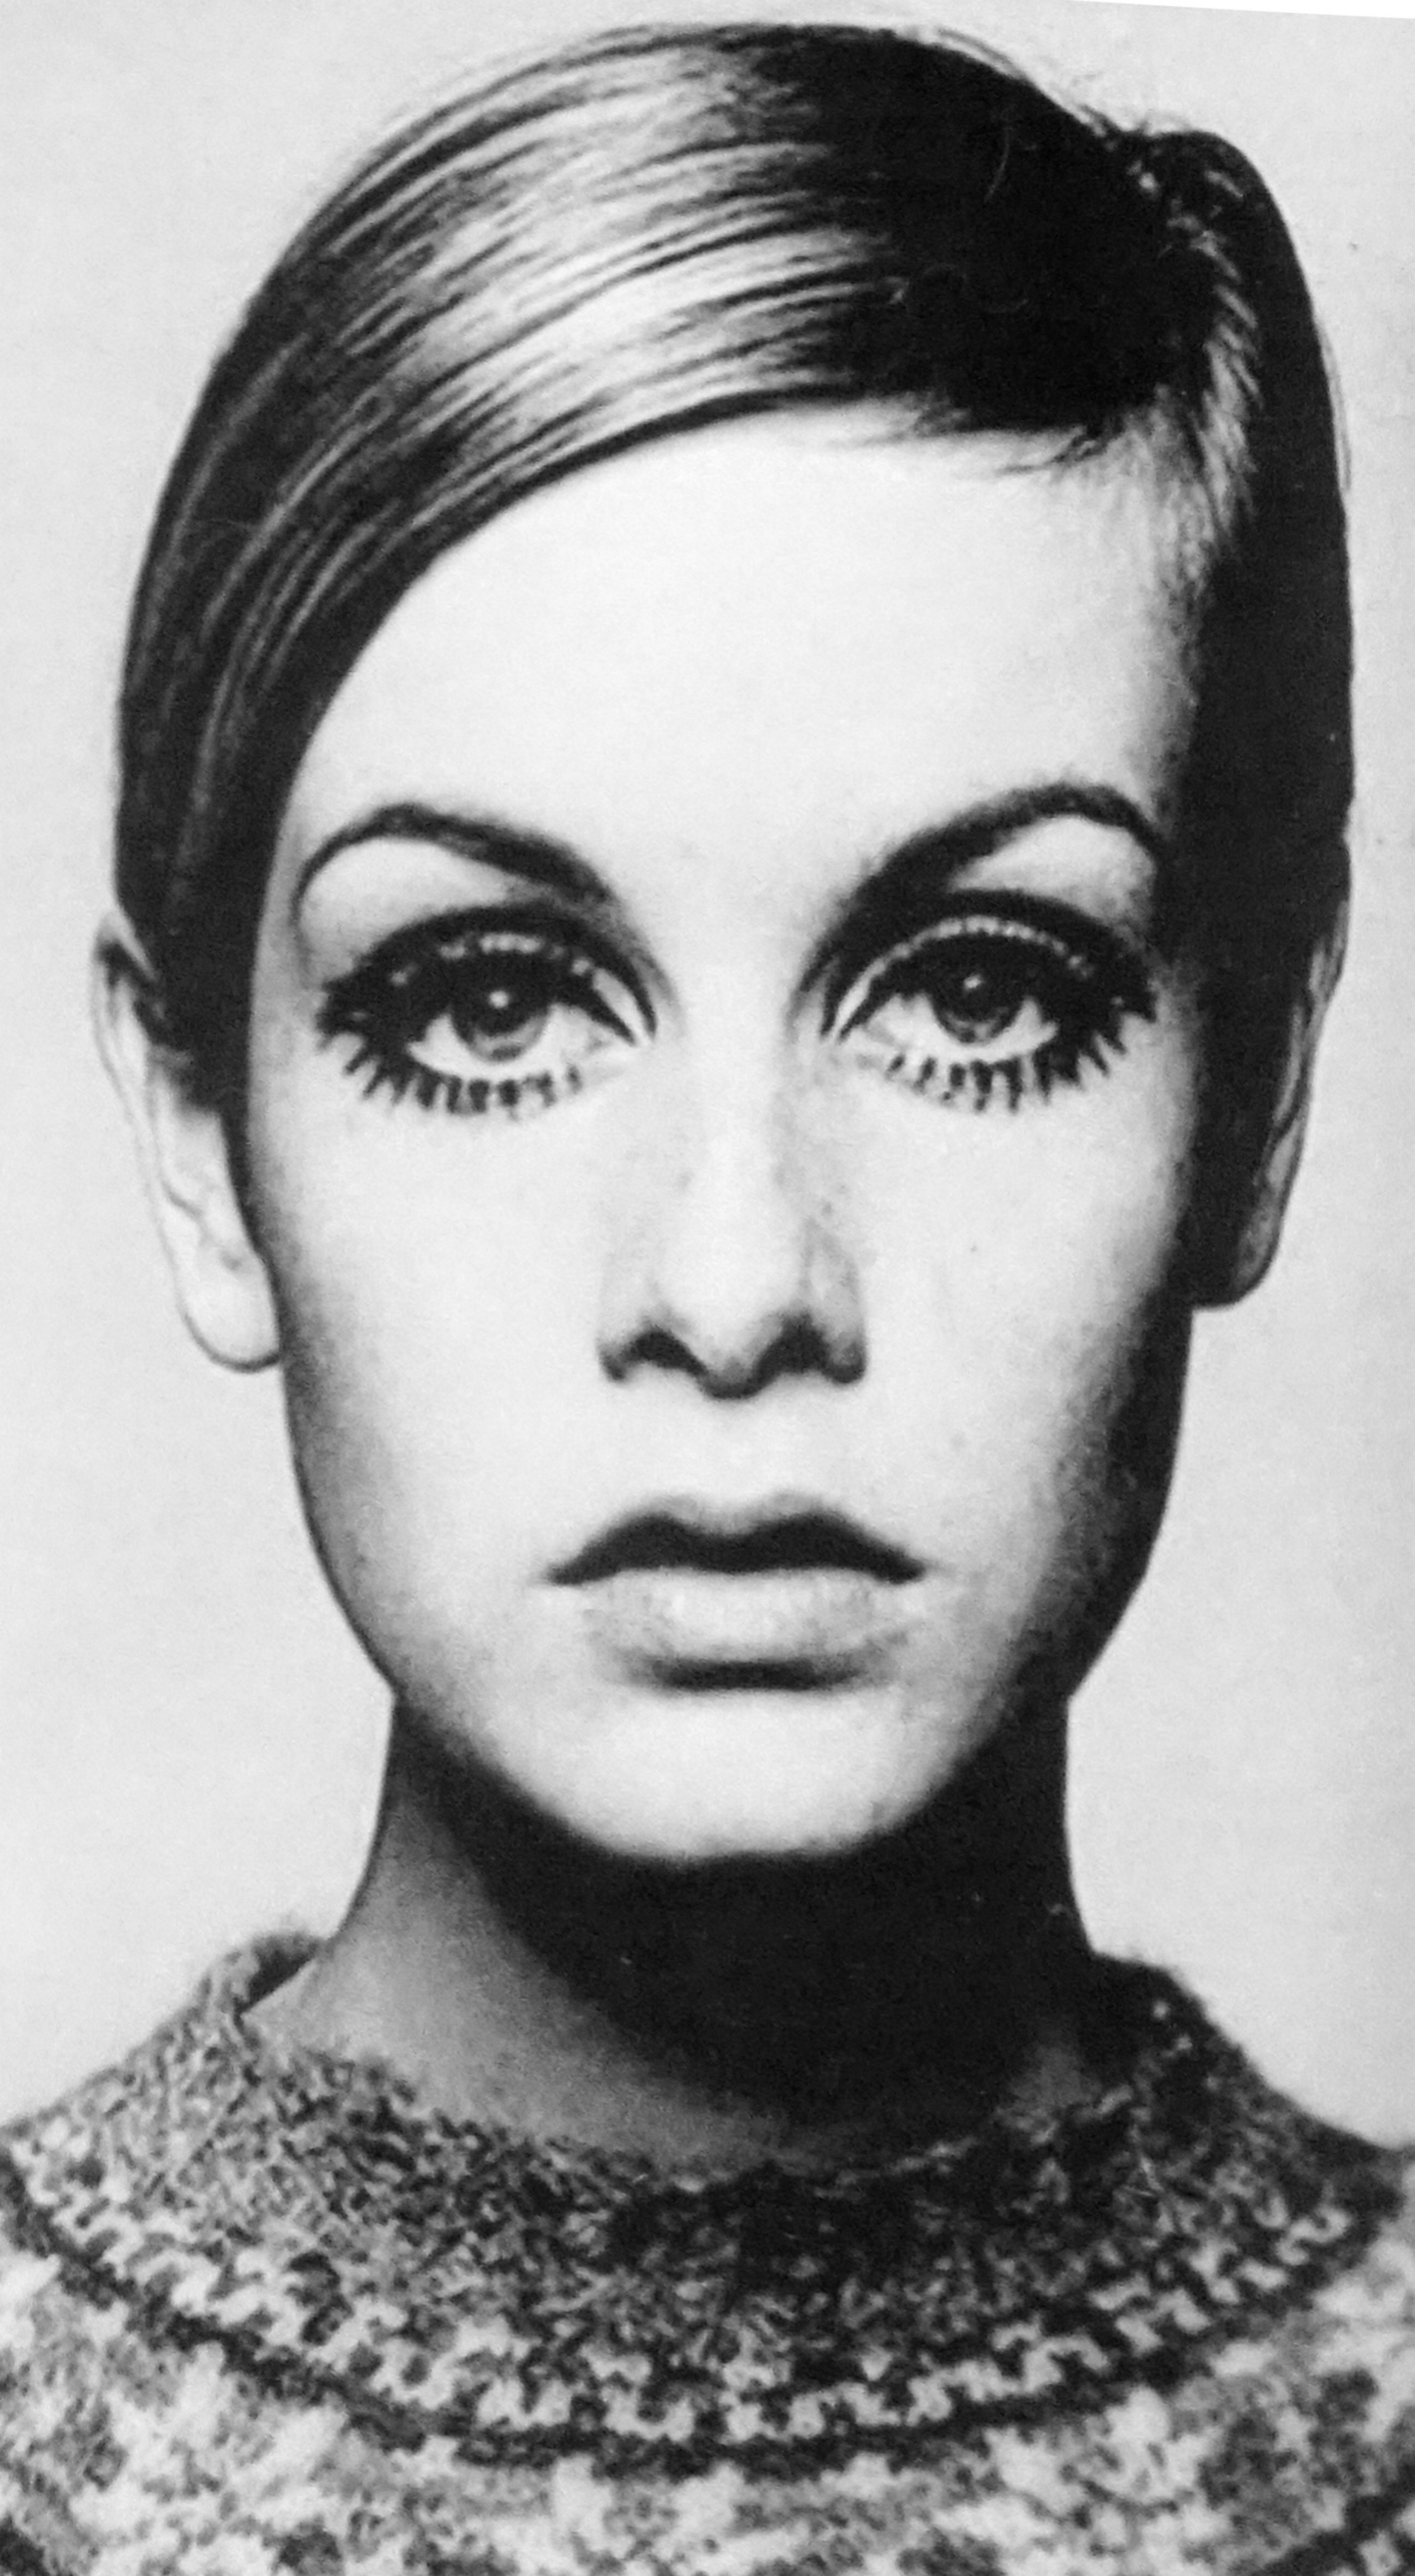 A headshot of Twiggy from the &#x27;60s